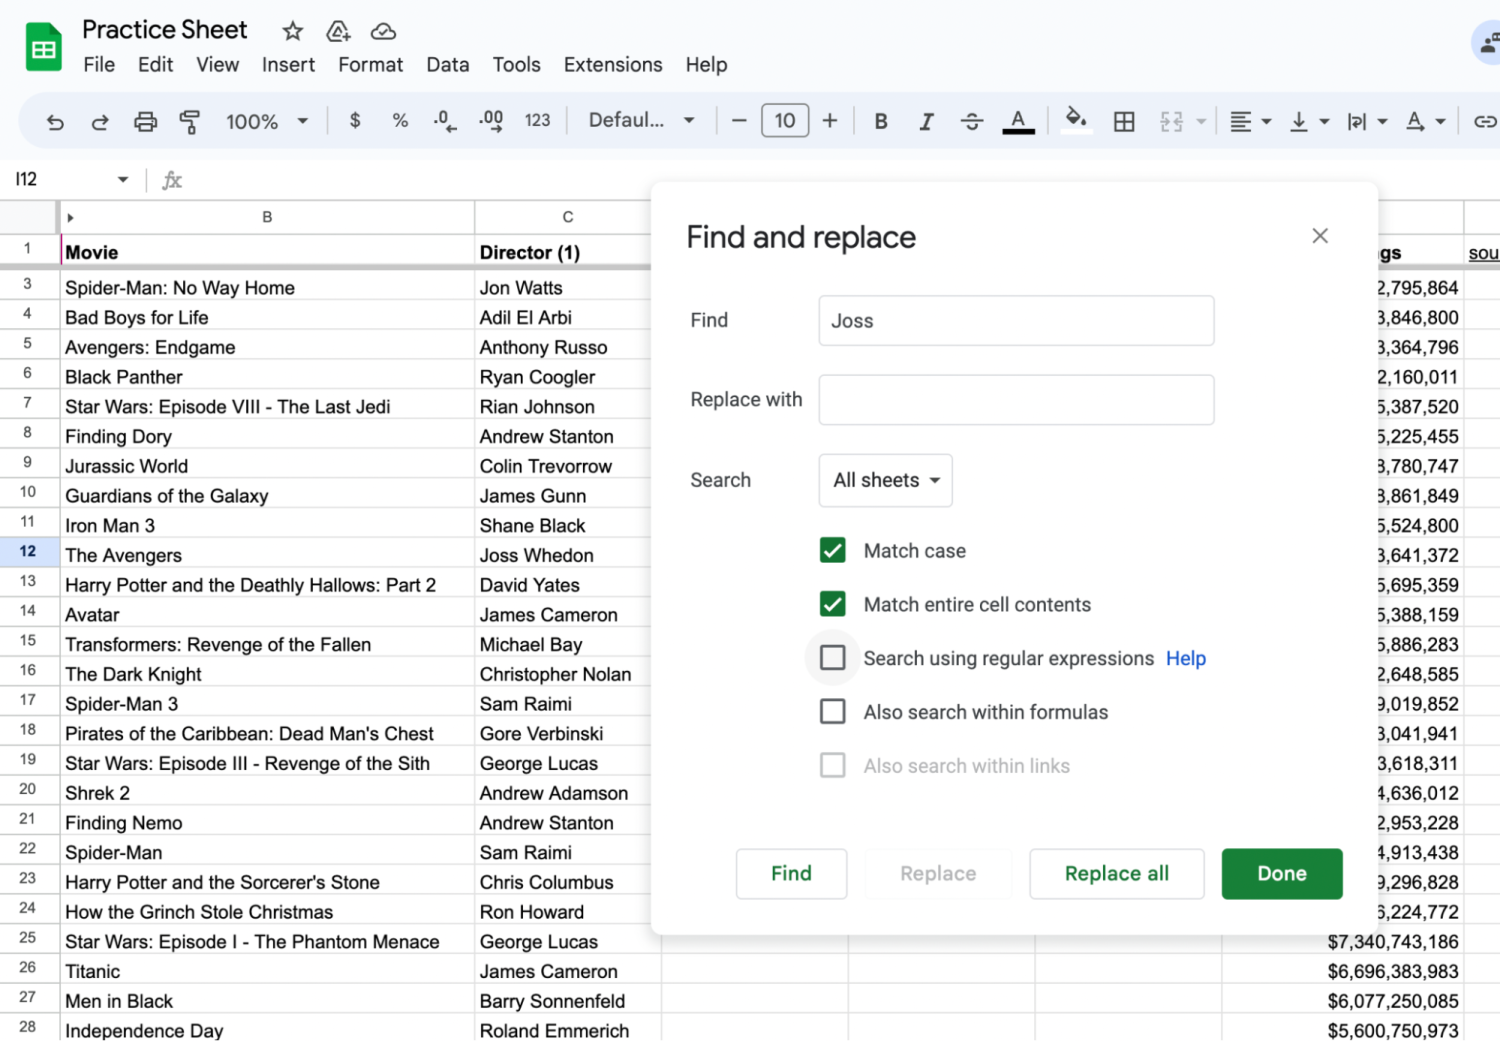 [Screenshot] Screenshot of the ‘Find and replace’ box on Google Sheets displayed with the ‘Match case’ and ‘Match the entire cell contents’ boxes ticked